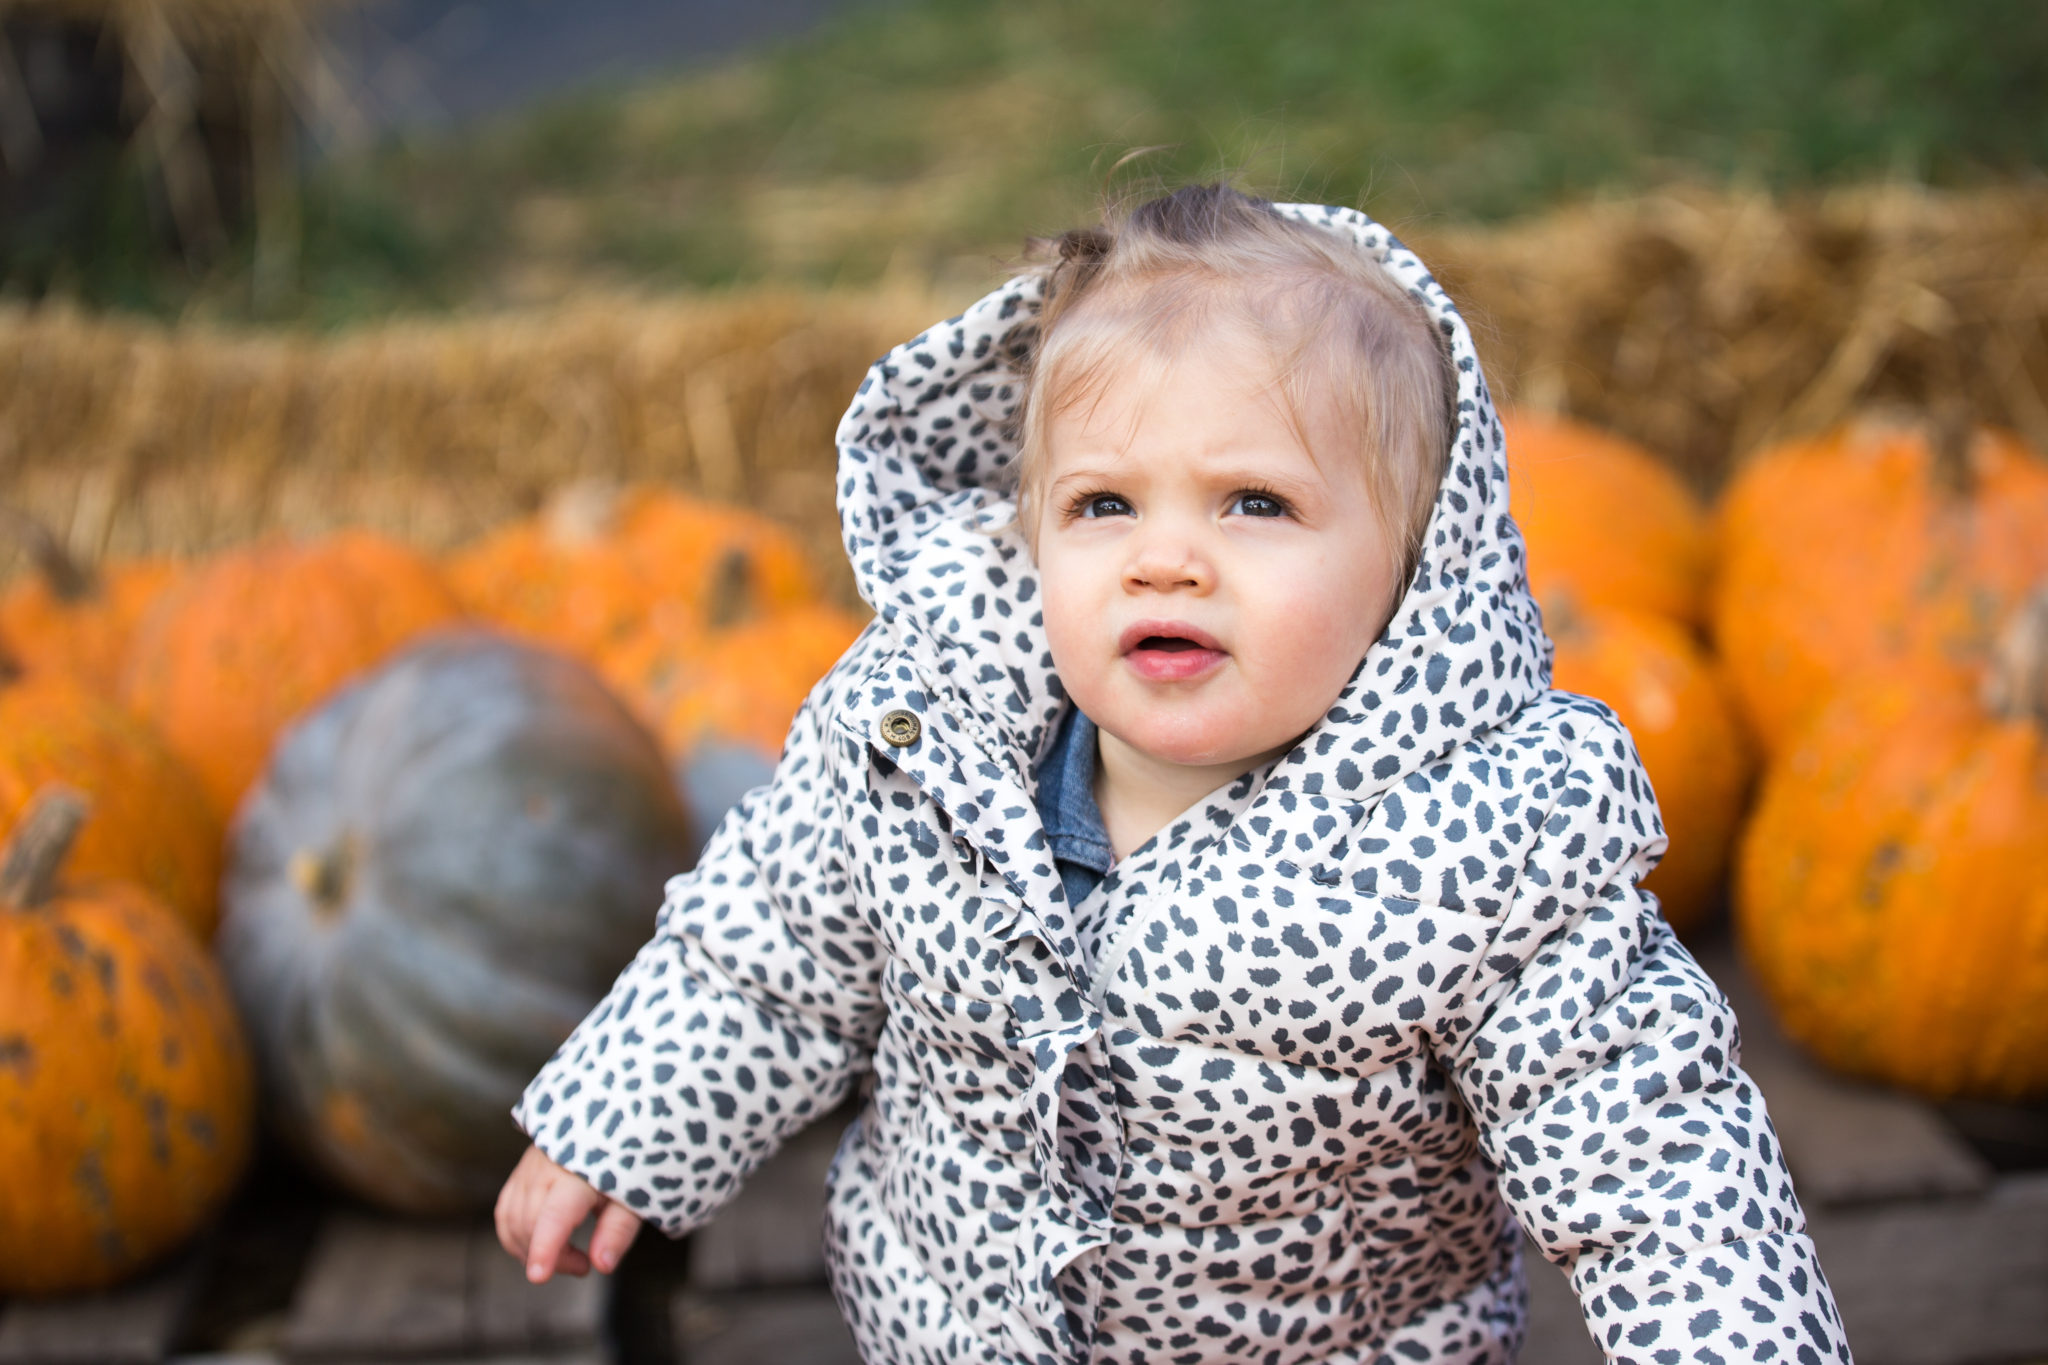 toddler style | fall style | outdoor photography | family photography | child photography | lifestyle photography | allweareblog.com